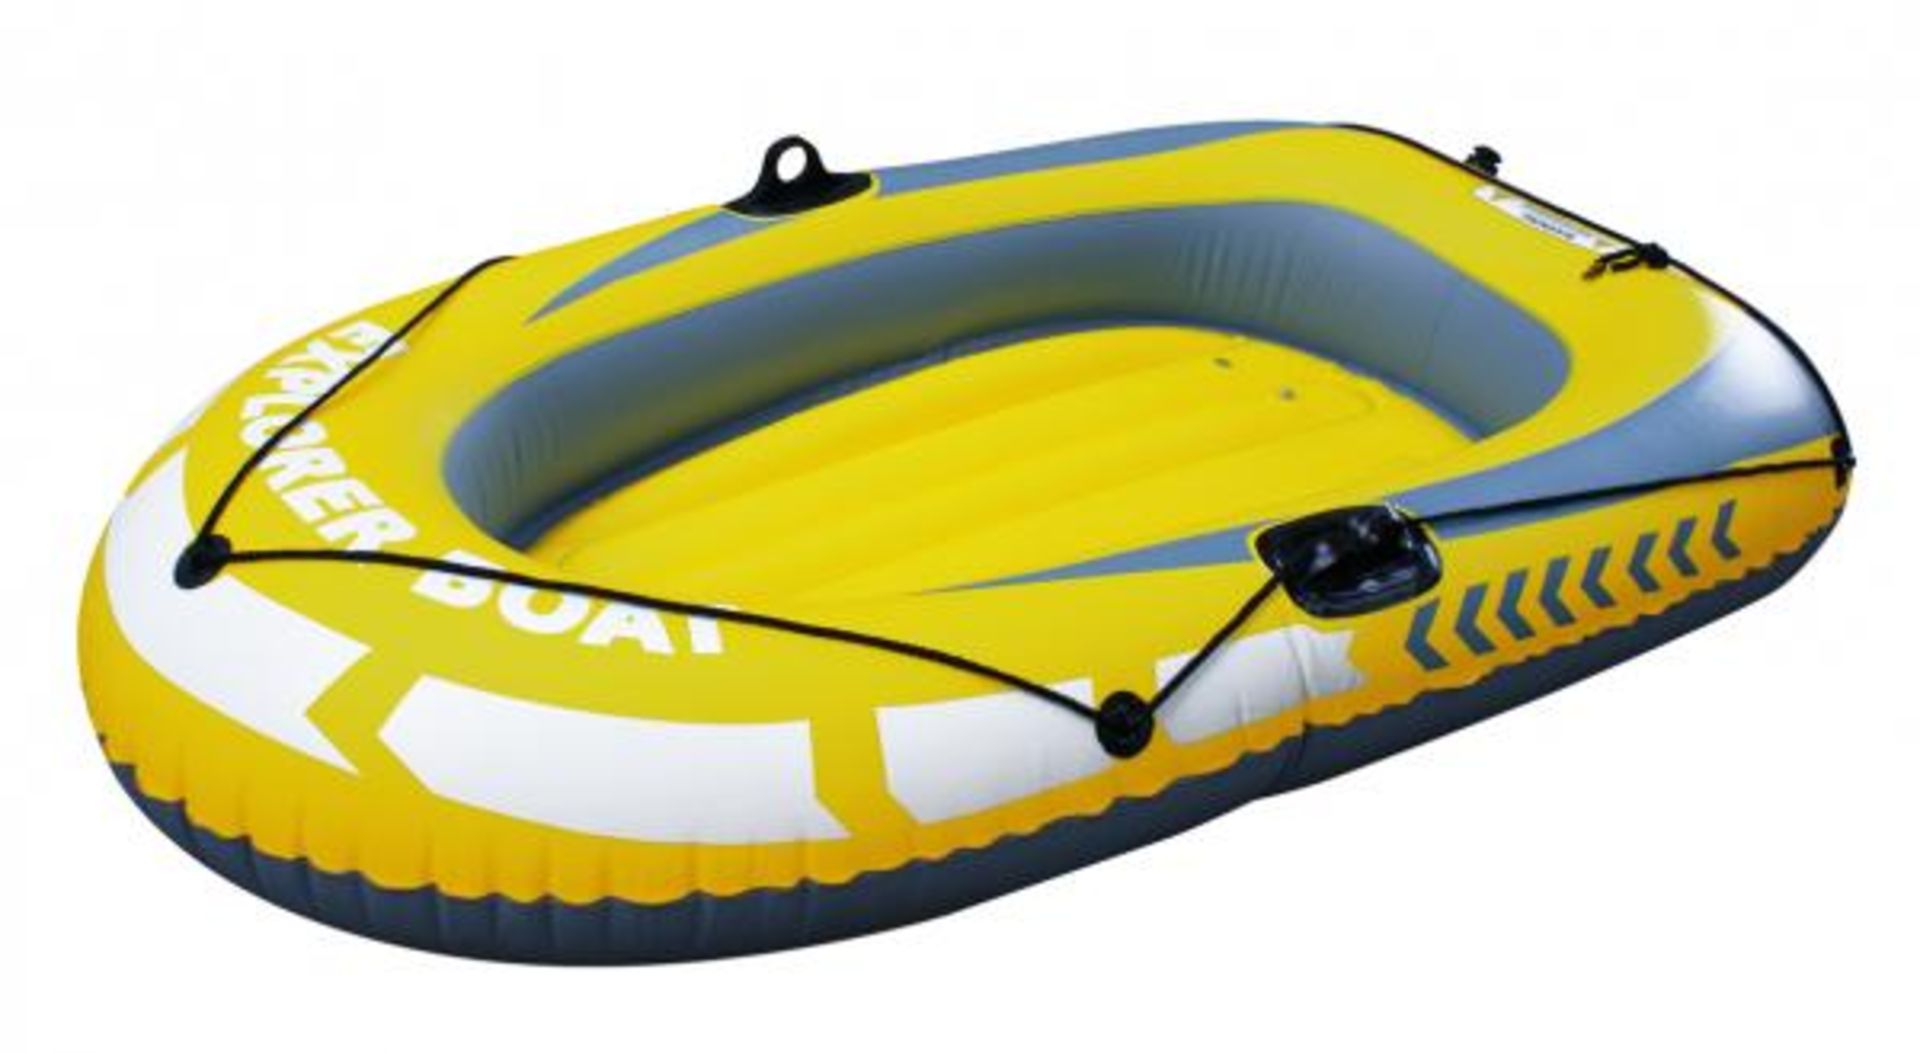 V Brand New Large Inflatable Dinghy 188 x 114 cm RRP £79.99